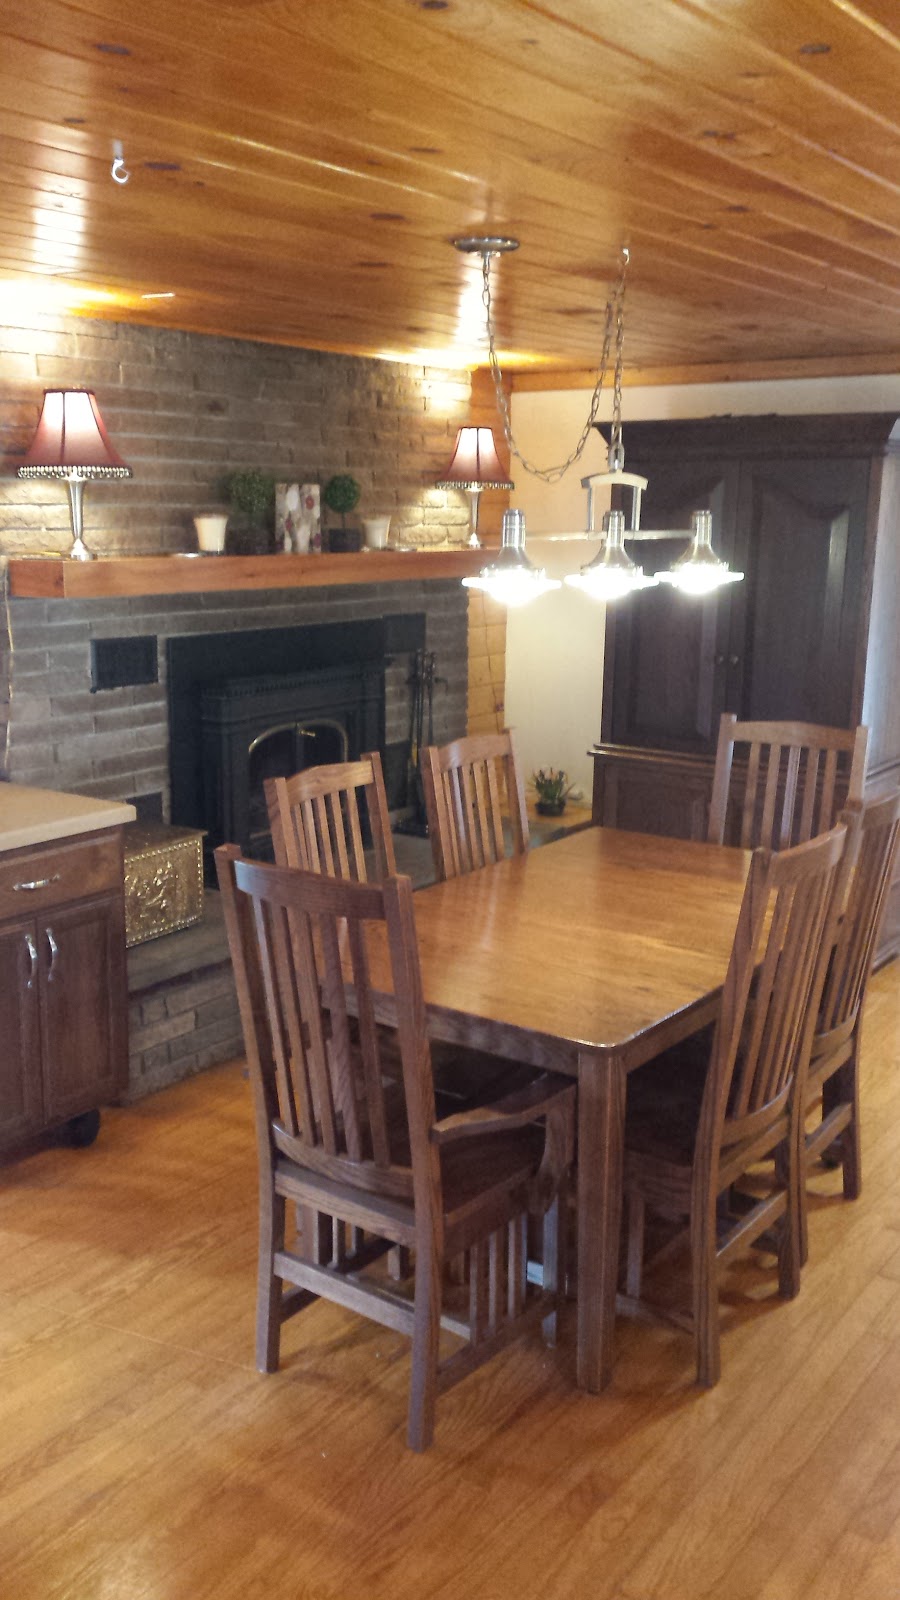 Lakeview Retreat Vacation Rental | 109 1st St, Lakeville, PA 18438 | Phone: (570) 430-1356